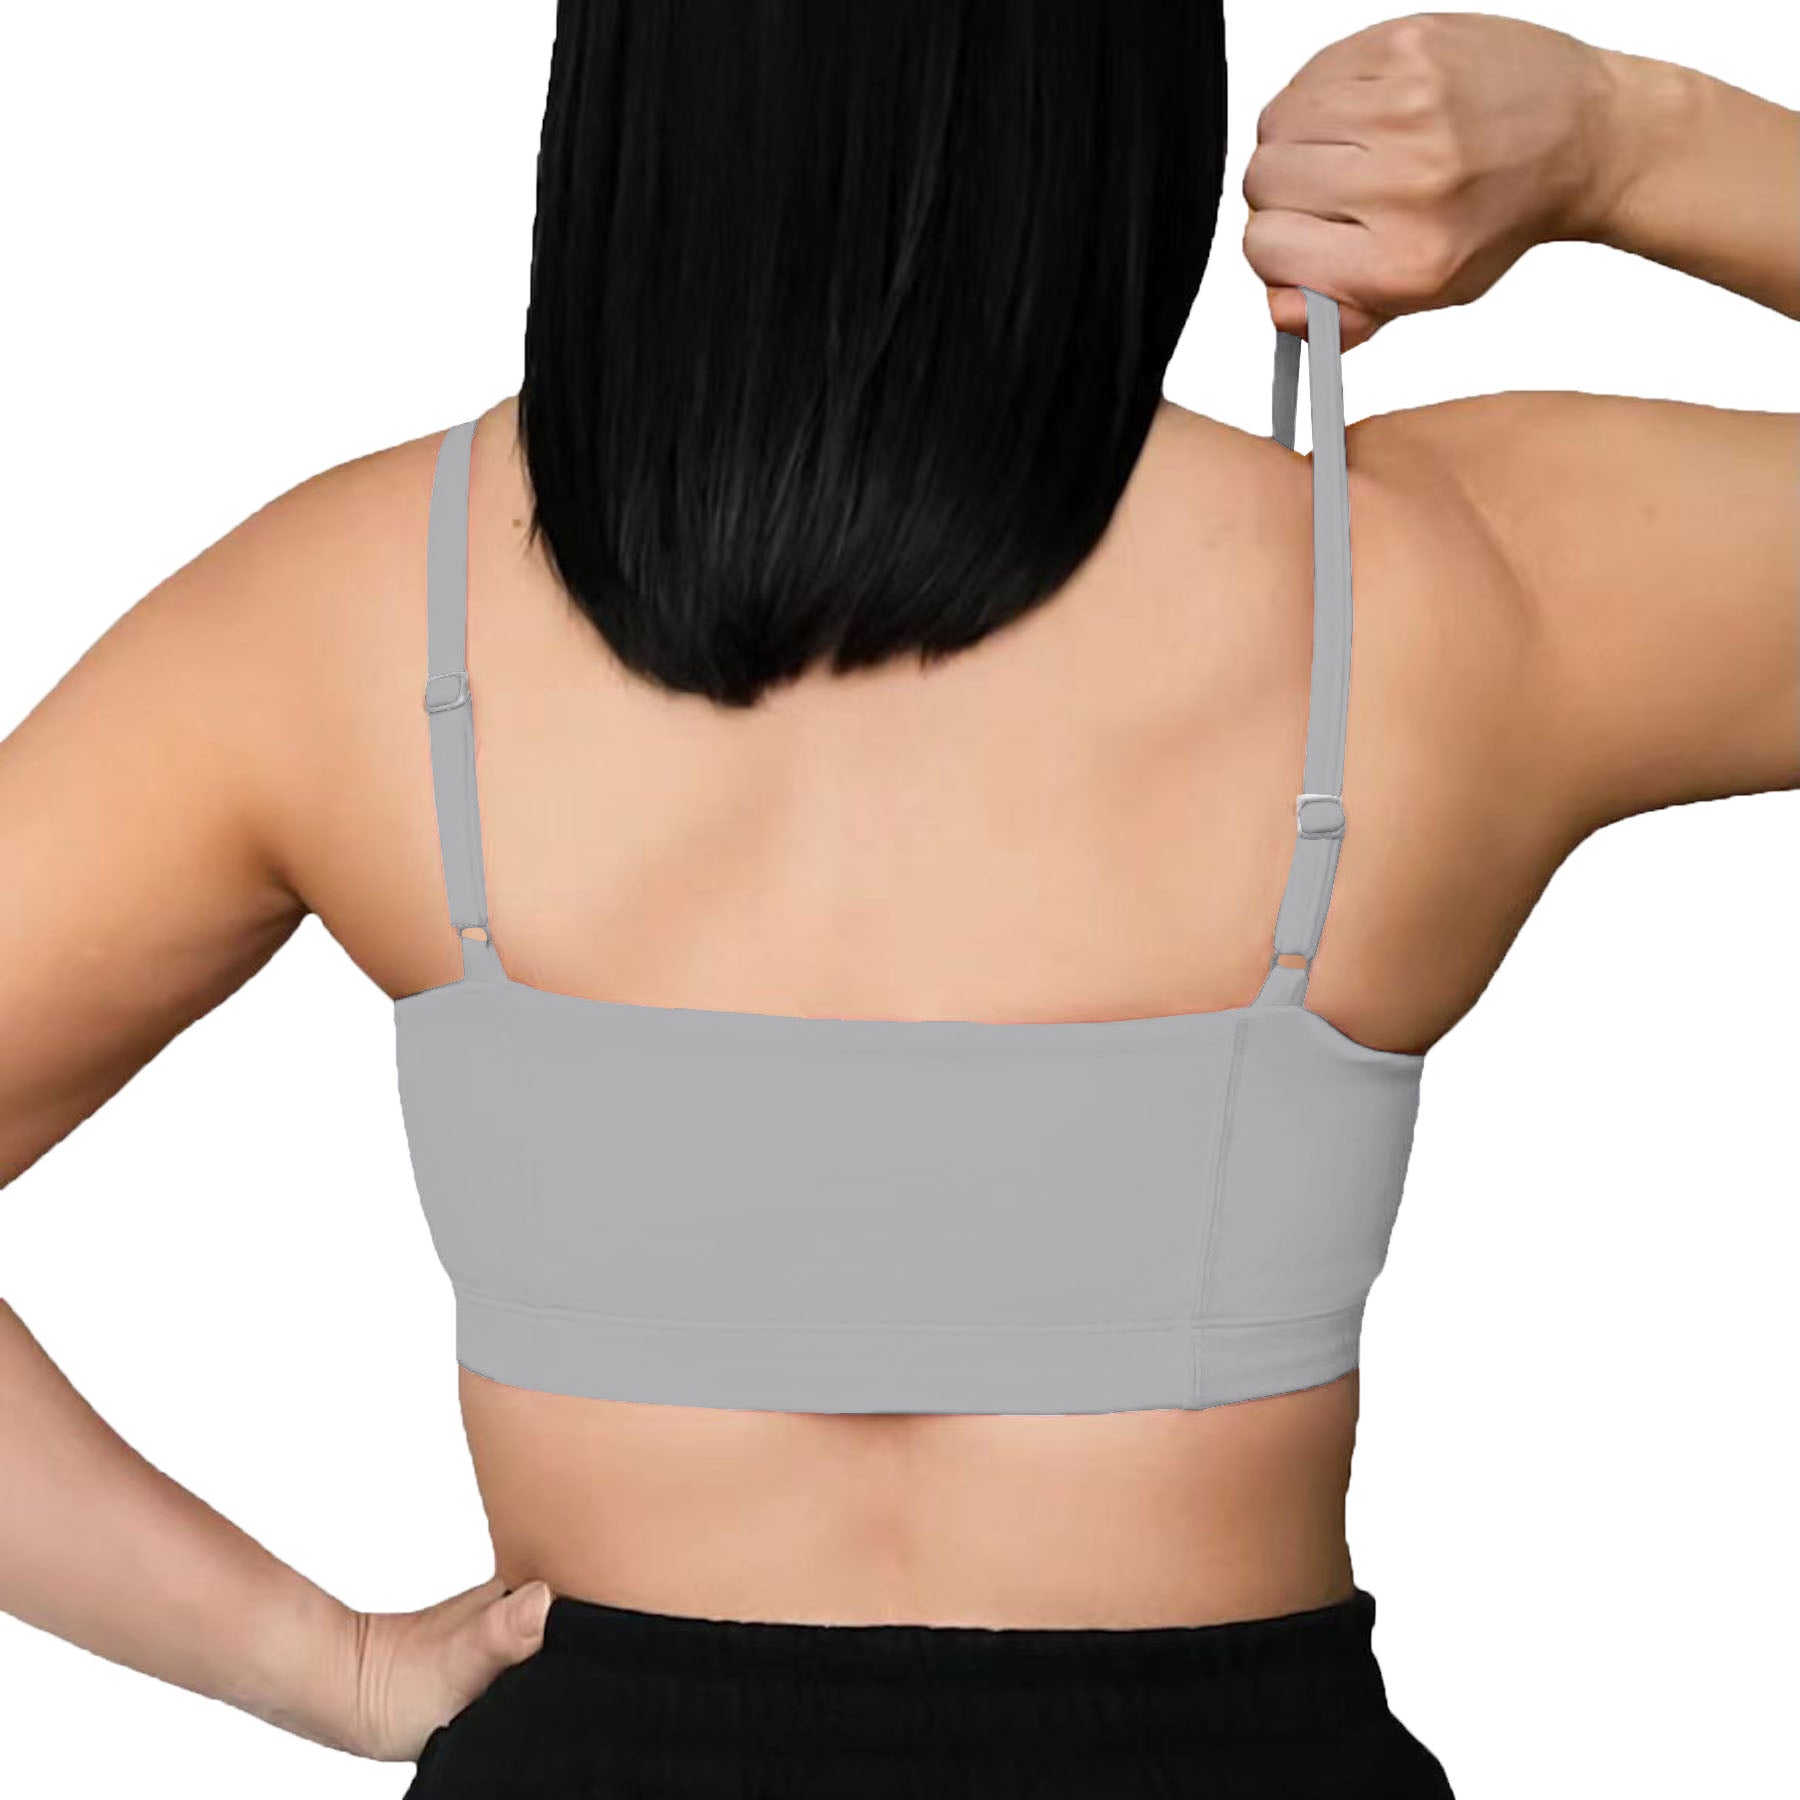 Aoxjox Women's Workout Sports Bras Fitness Padded Backless Yoga Crop Tank  Top Twist Back Cami (Fudge Coffee, XX-Small) at  Women's Clothing  store